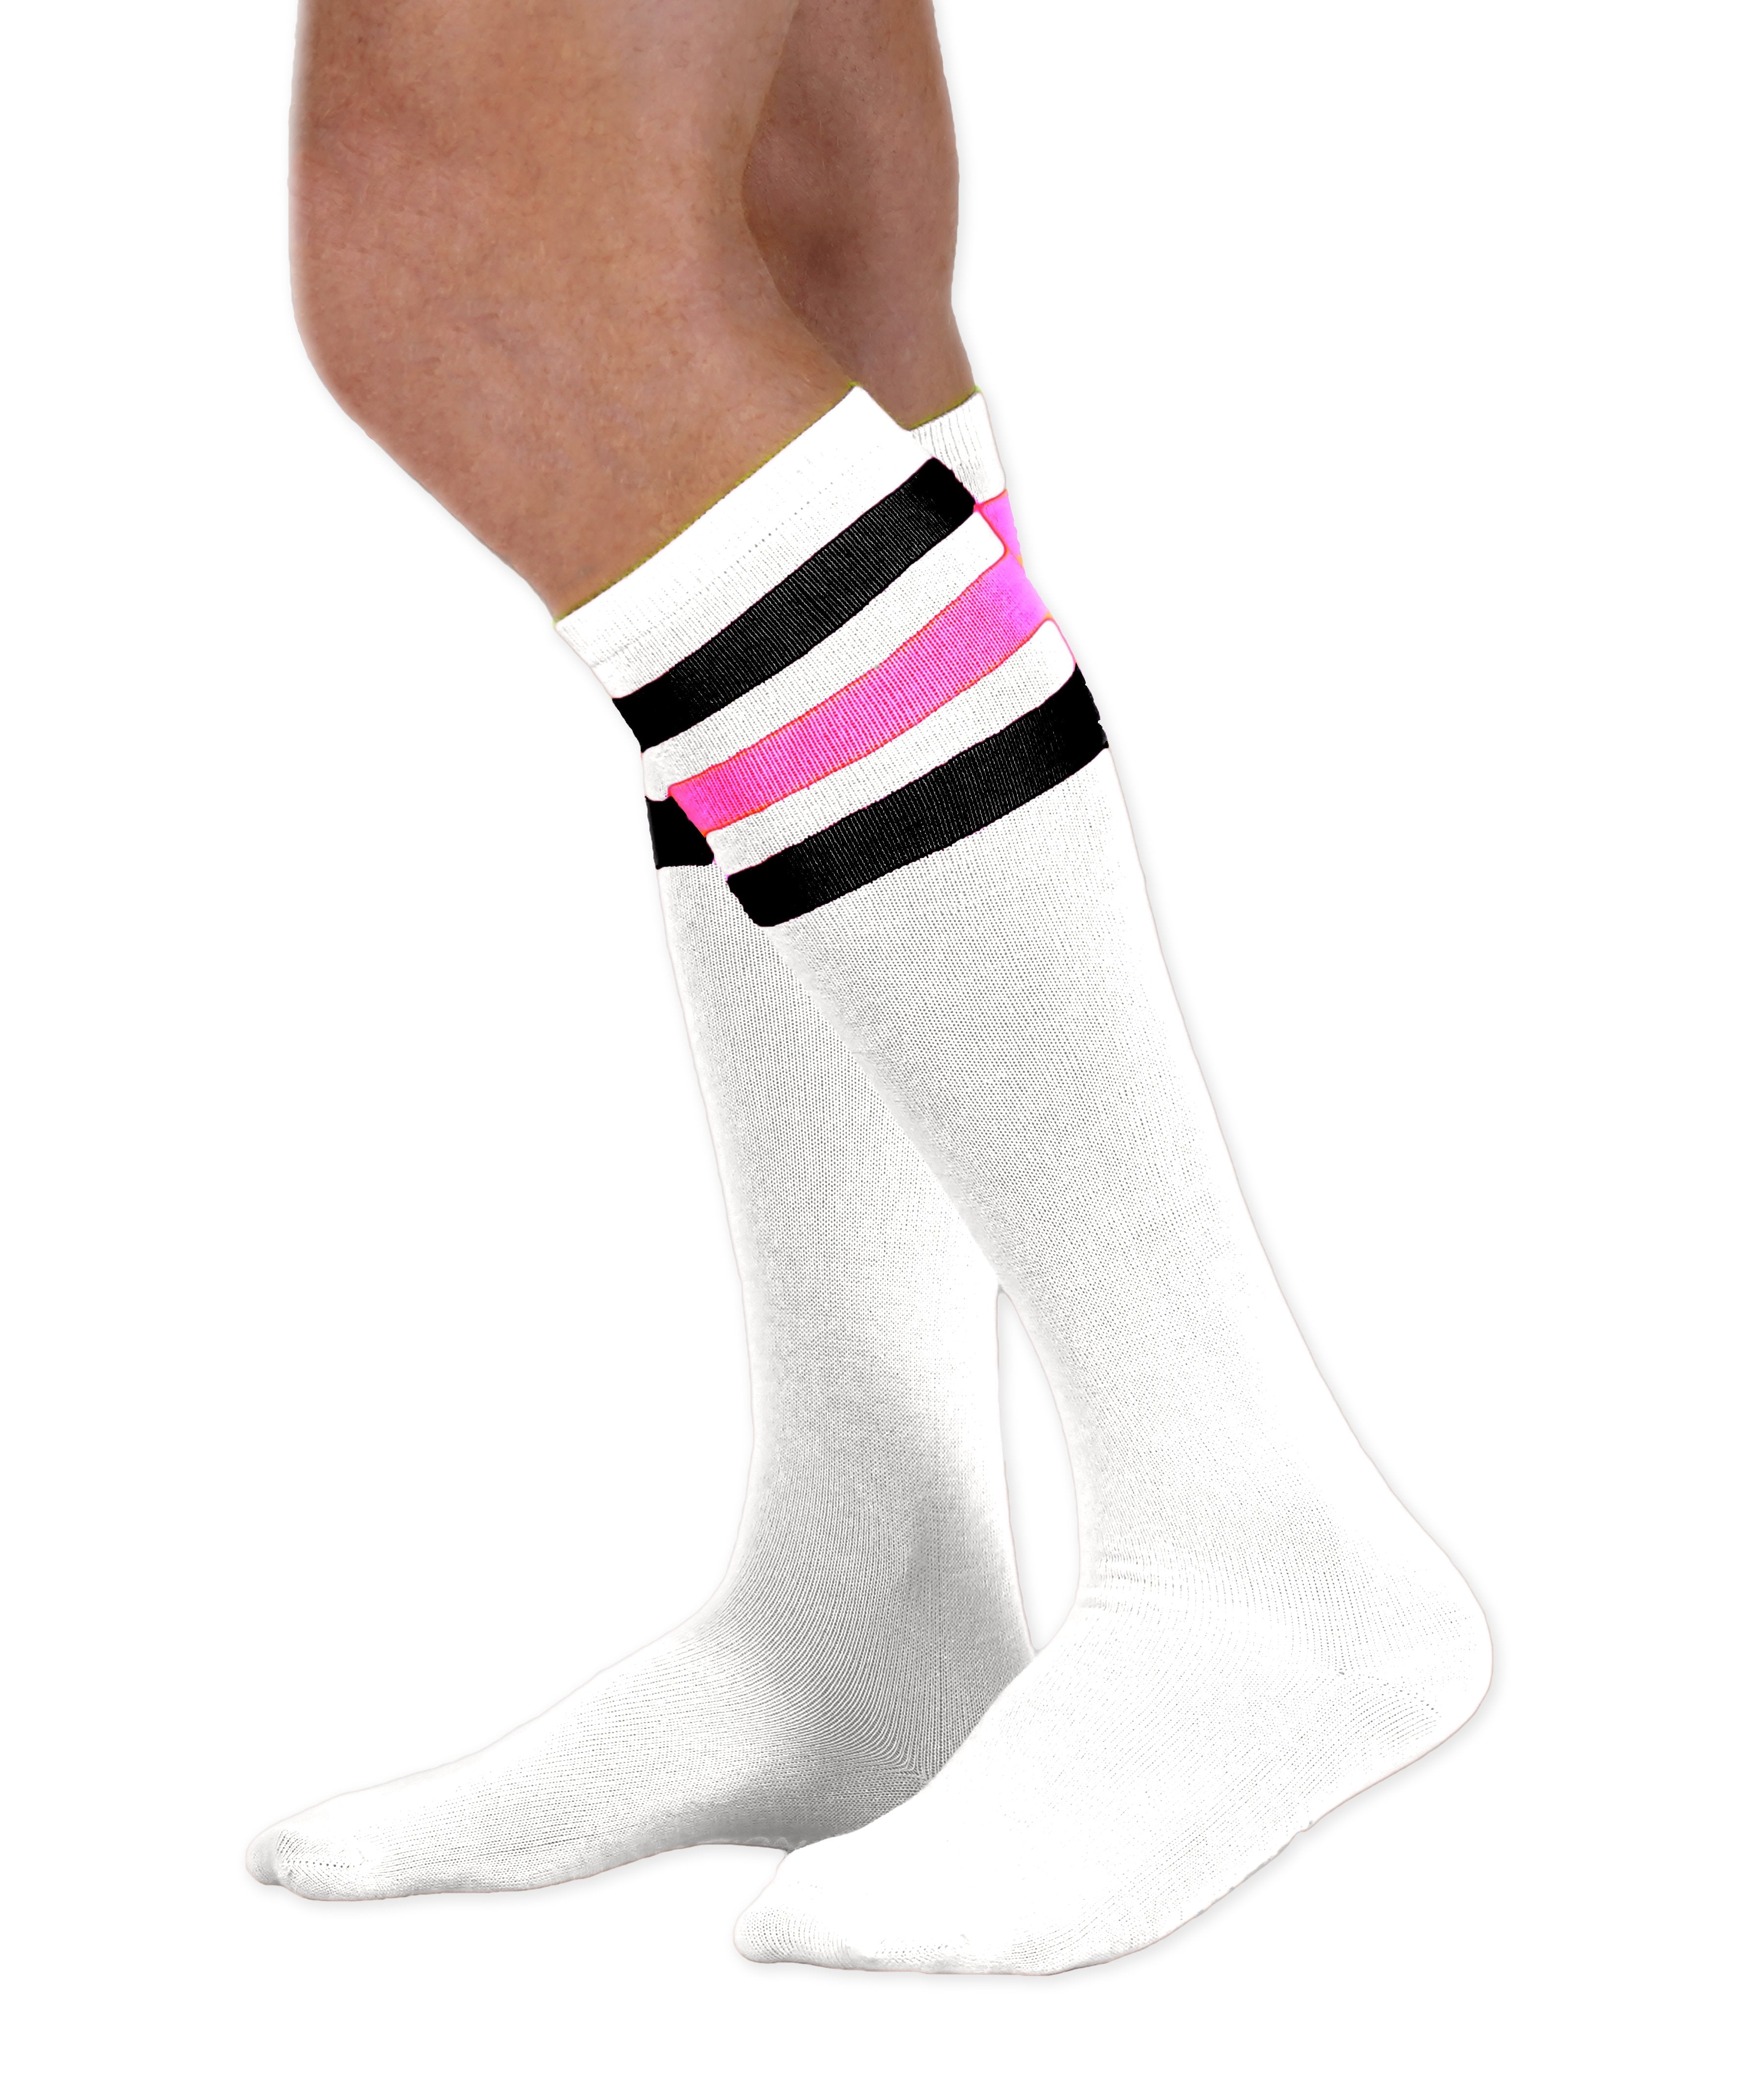 Unisex adult size white knee high tube sock with three black and fluorescent neon pink stripes